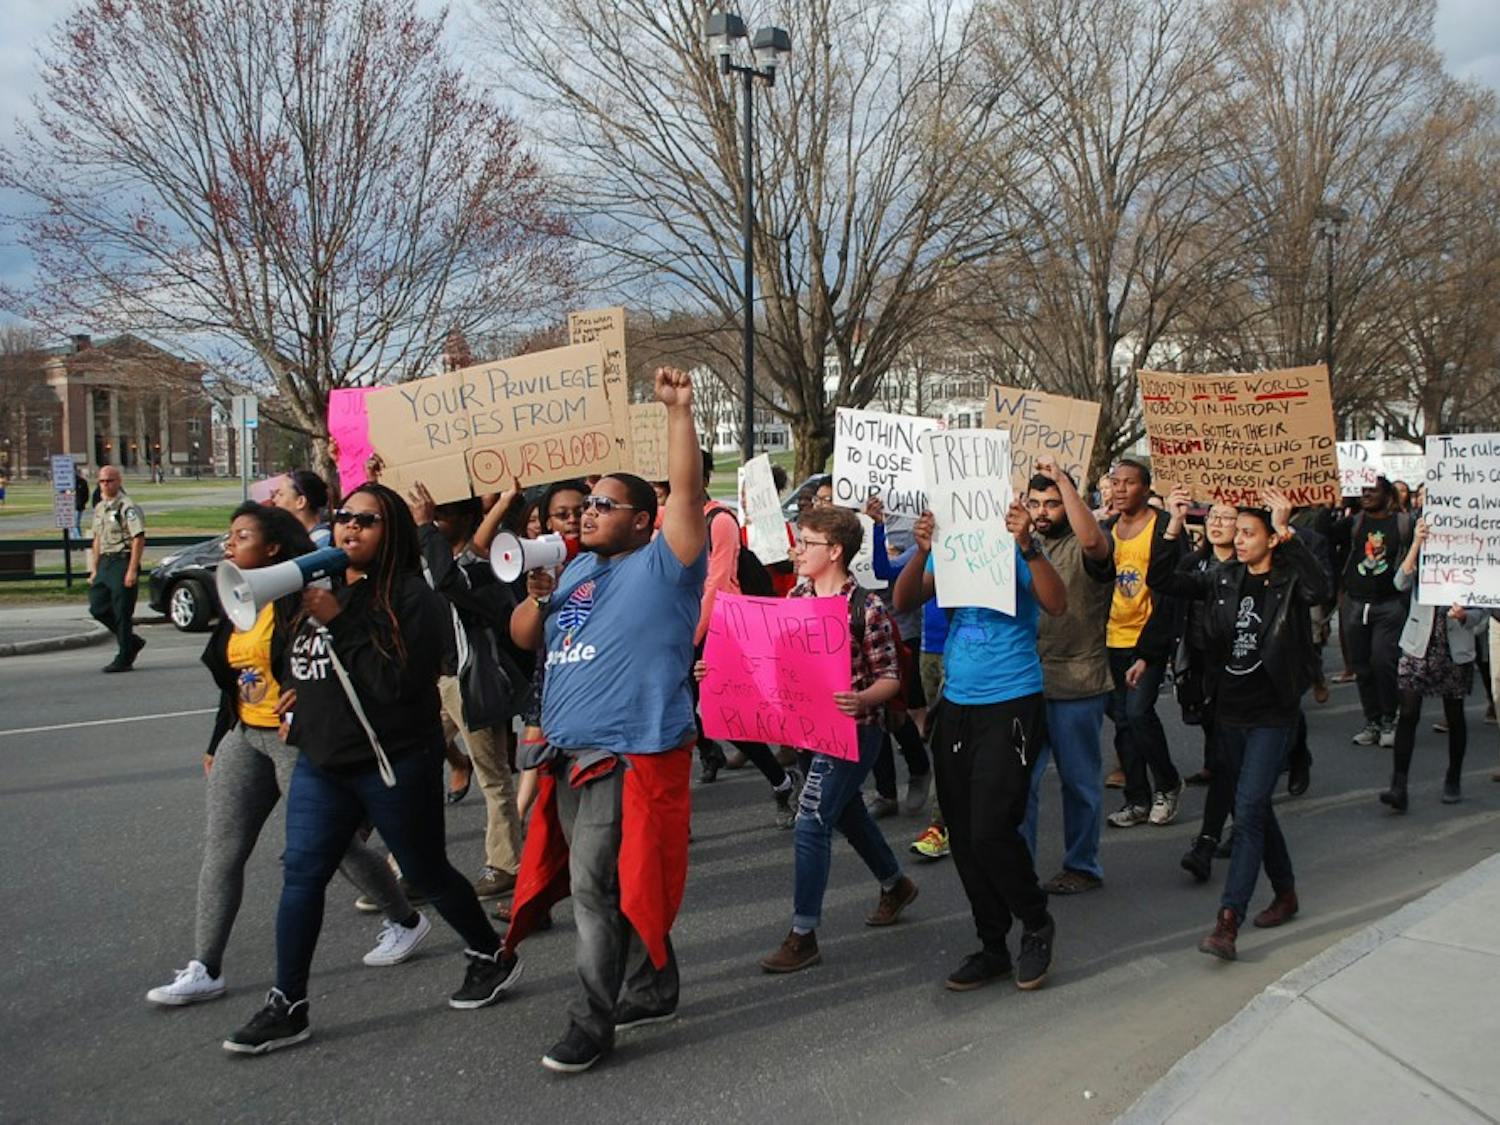 In May, students marched campus in solidarity with those protesting in Baltimore.